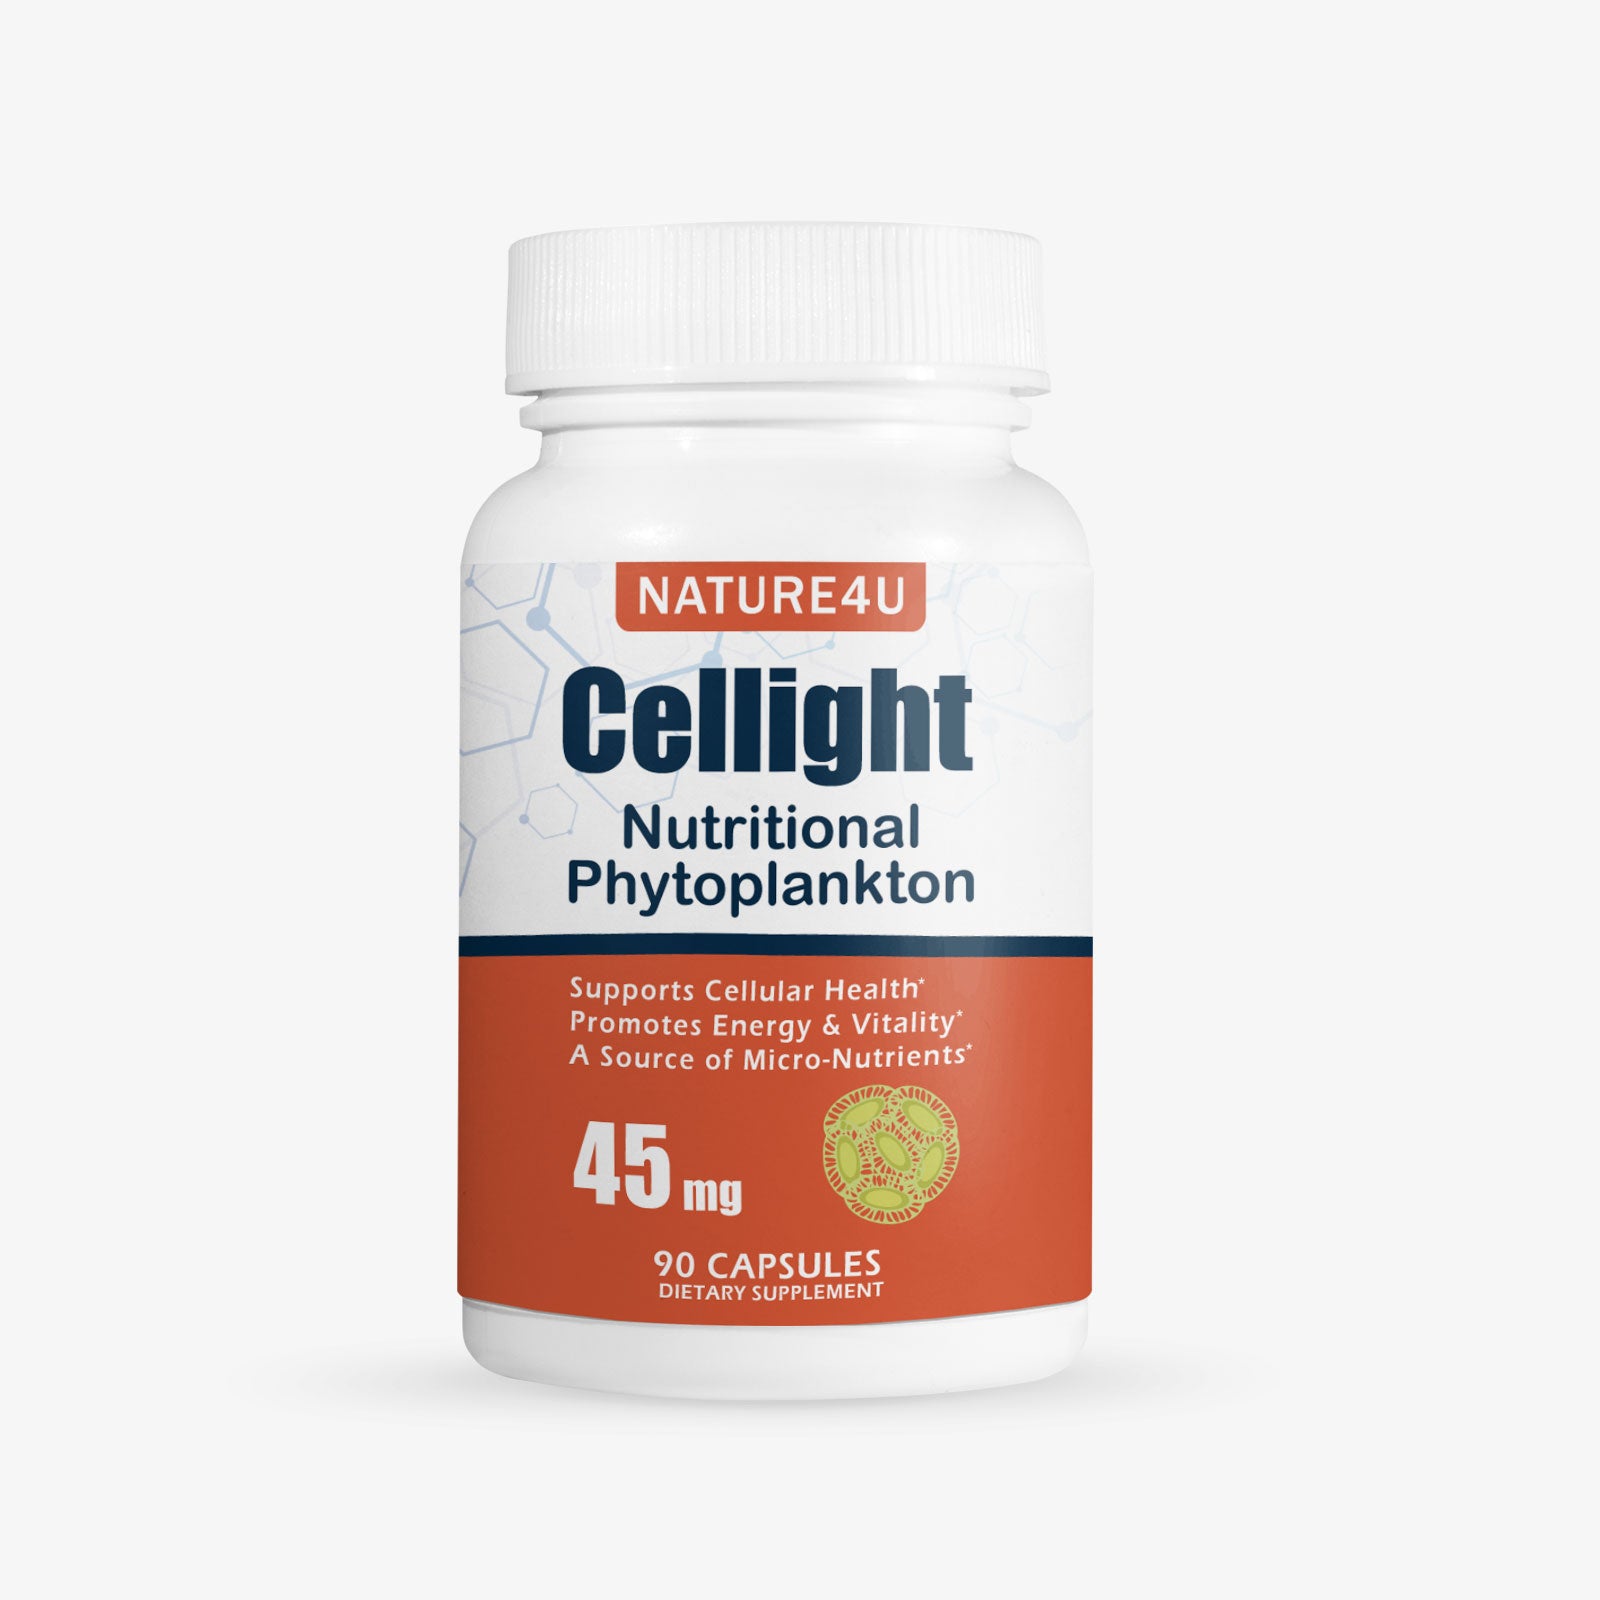 Cellight Nutritional Phytoplankton 90 Capsules